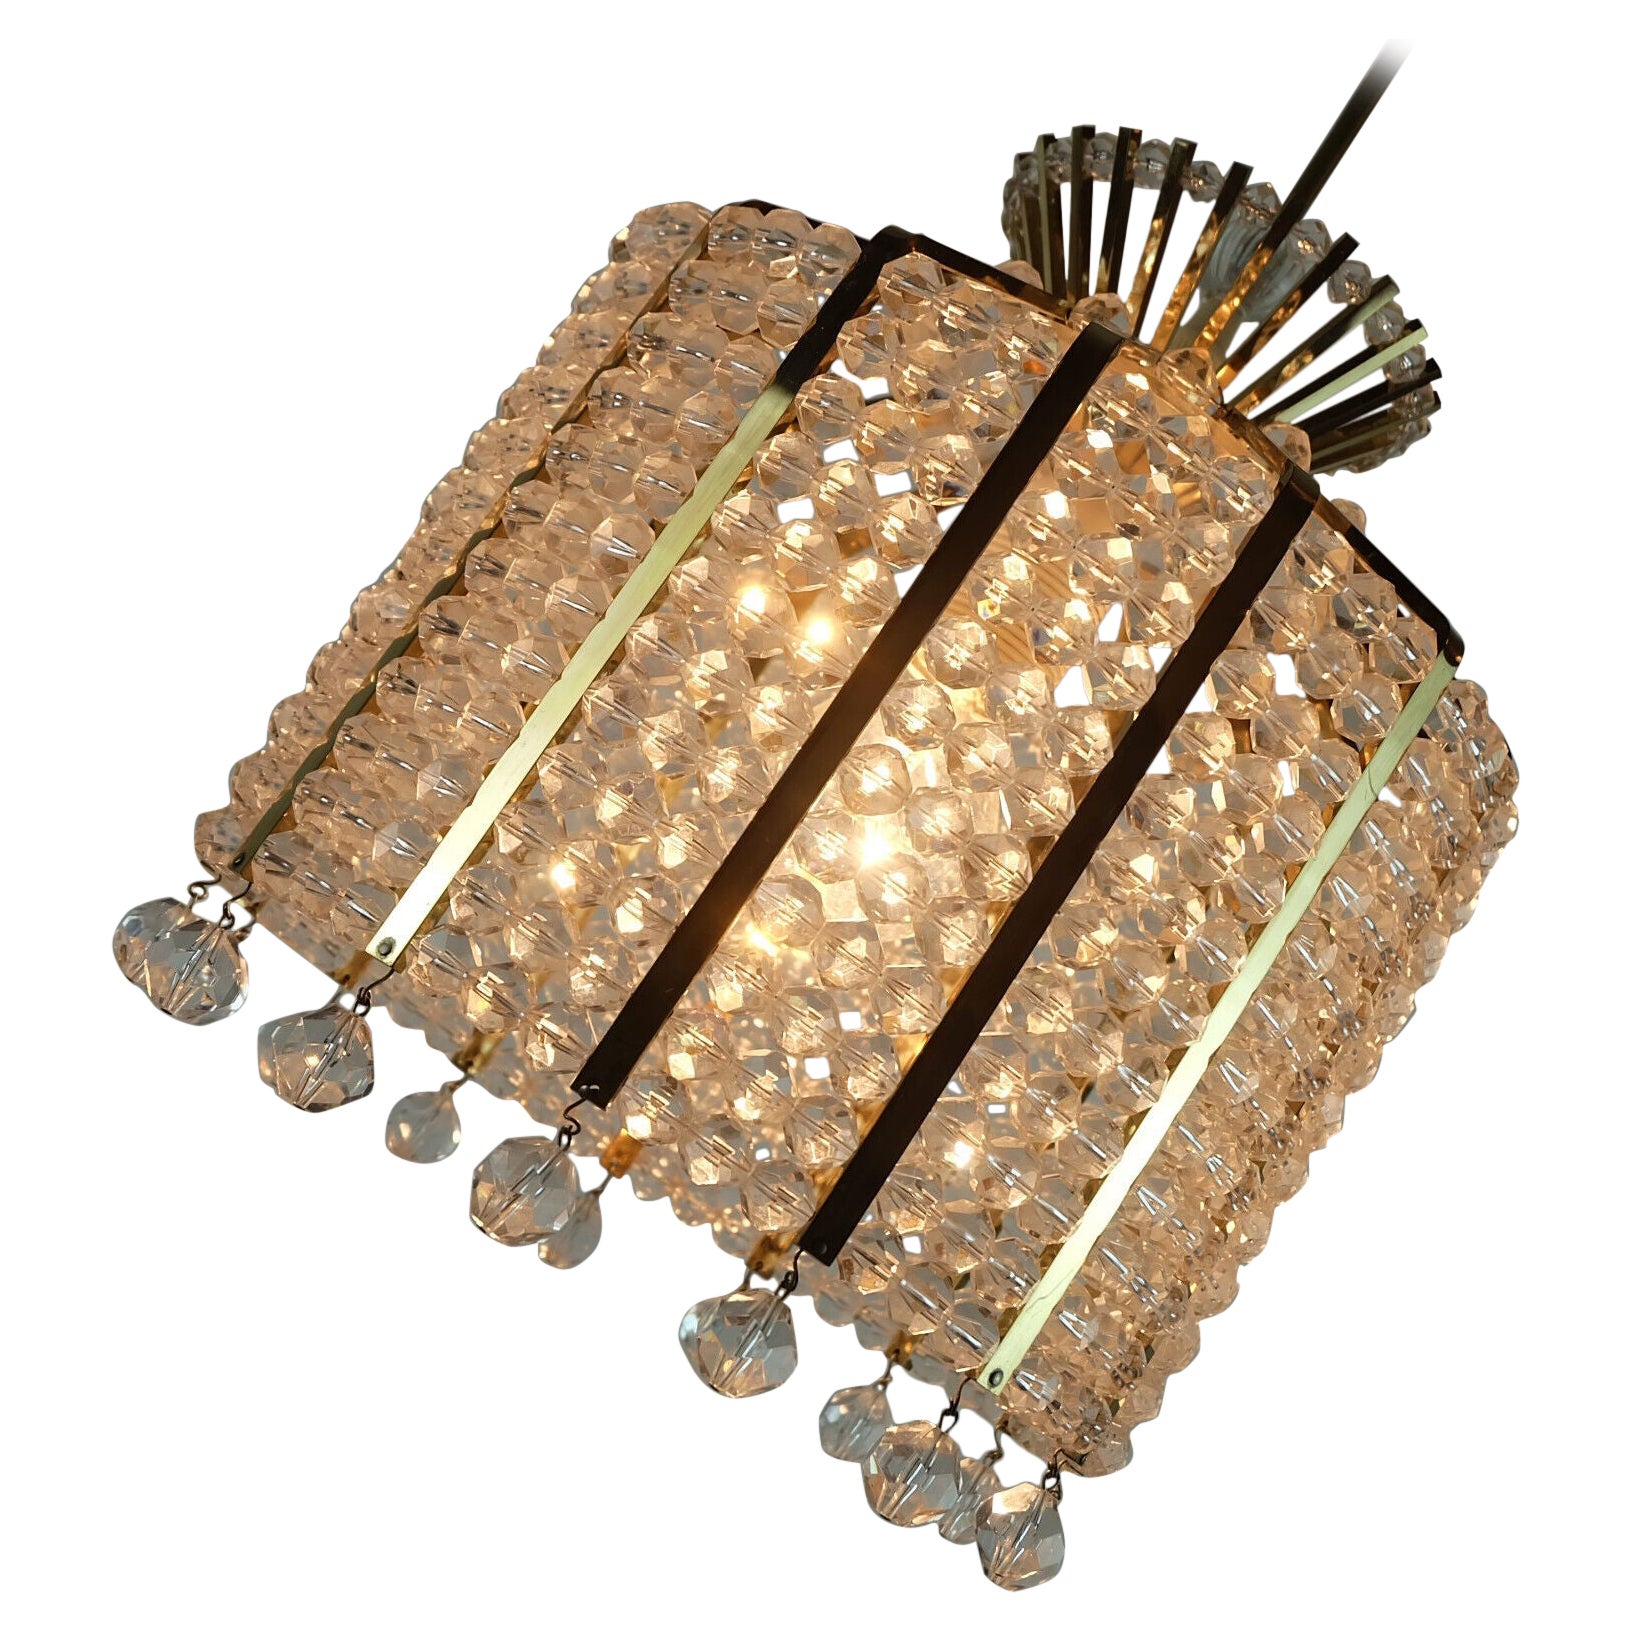 1960s PENDANT LIGHT brass and acrylic hollywood regency style For Sale